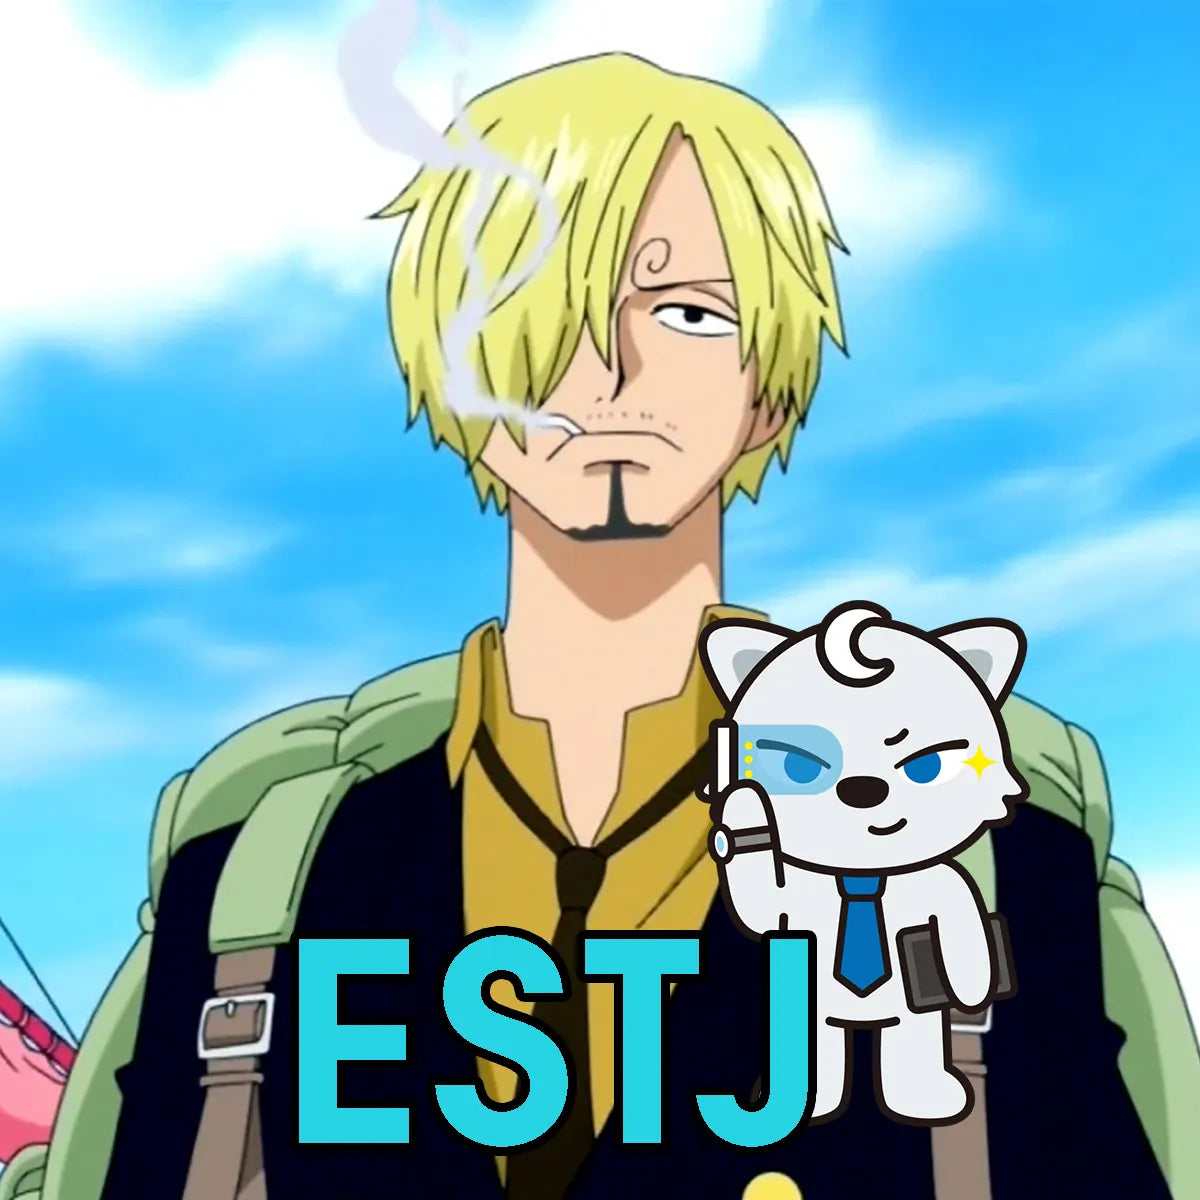 Anime Characters and Their MBTI Personality Types 